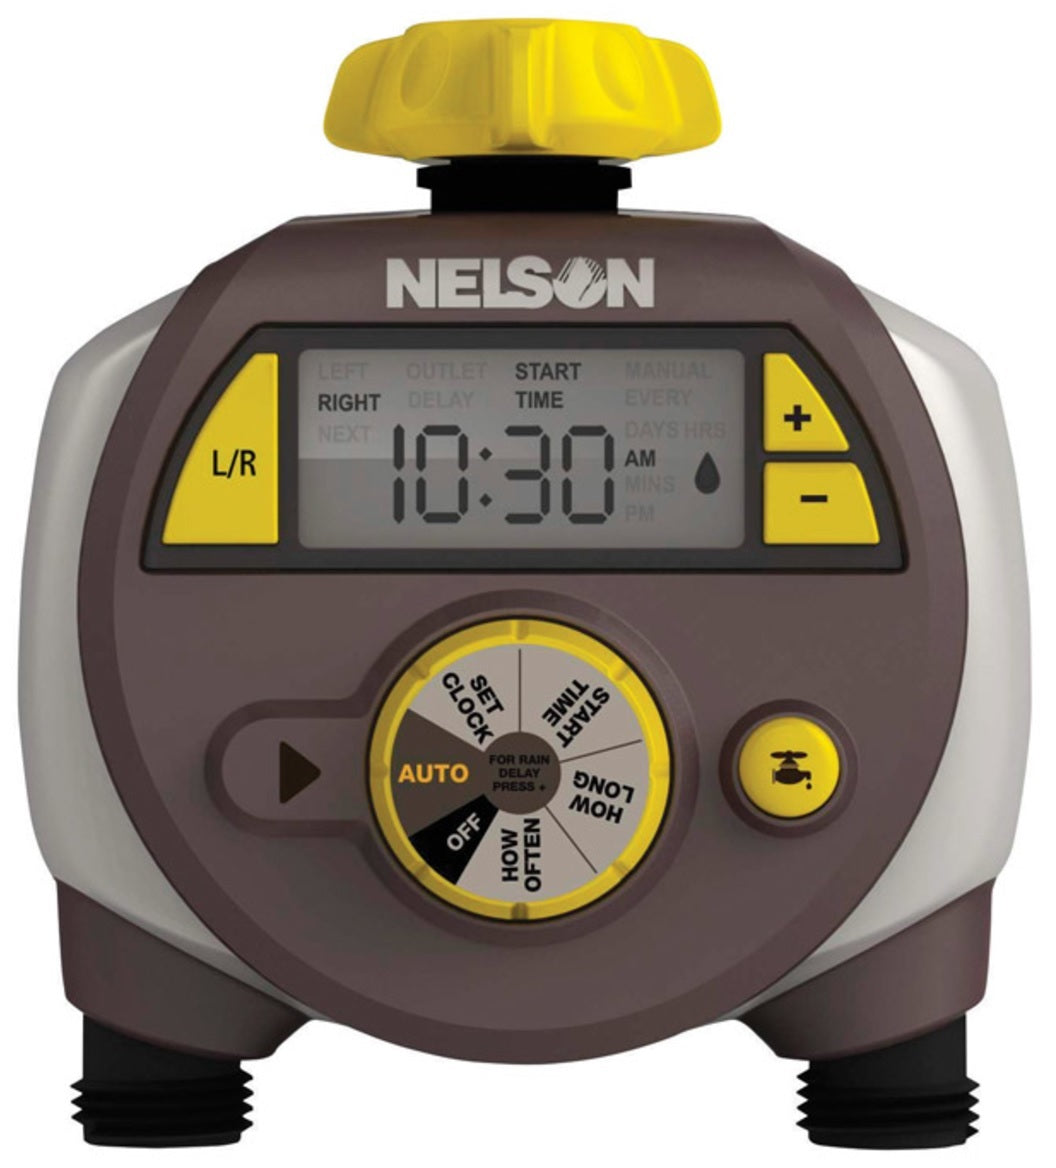 Nelson 856124-1001 Programmable 2 Zone Water Timer, Gray